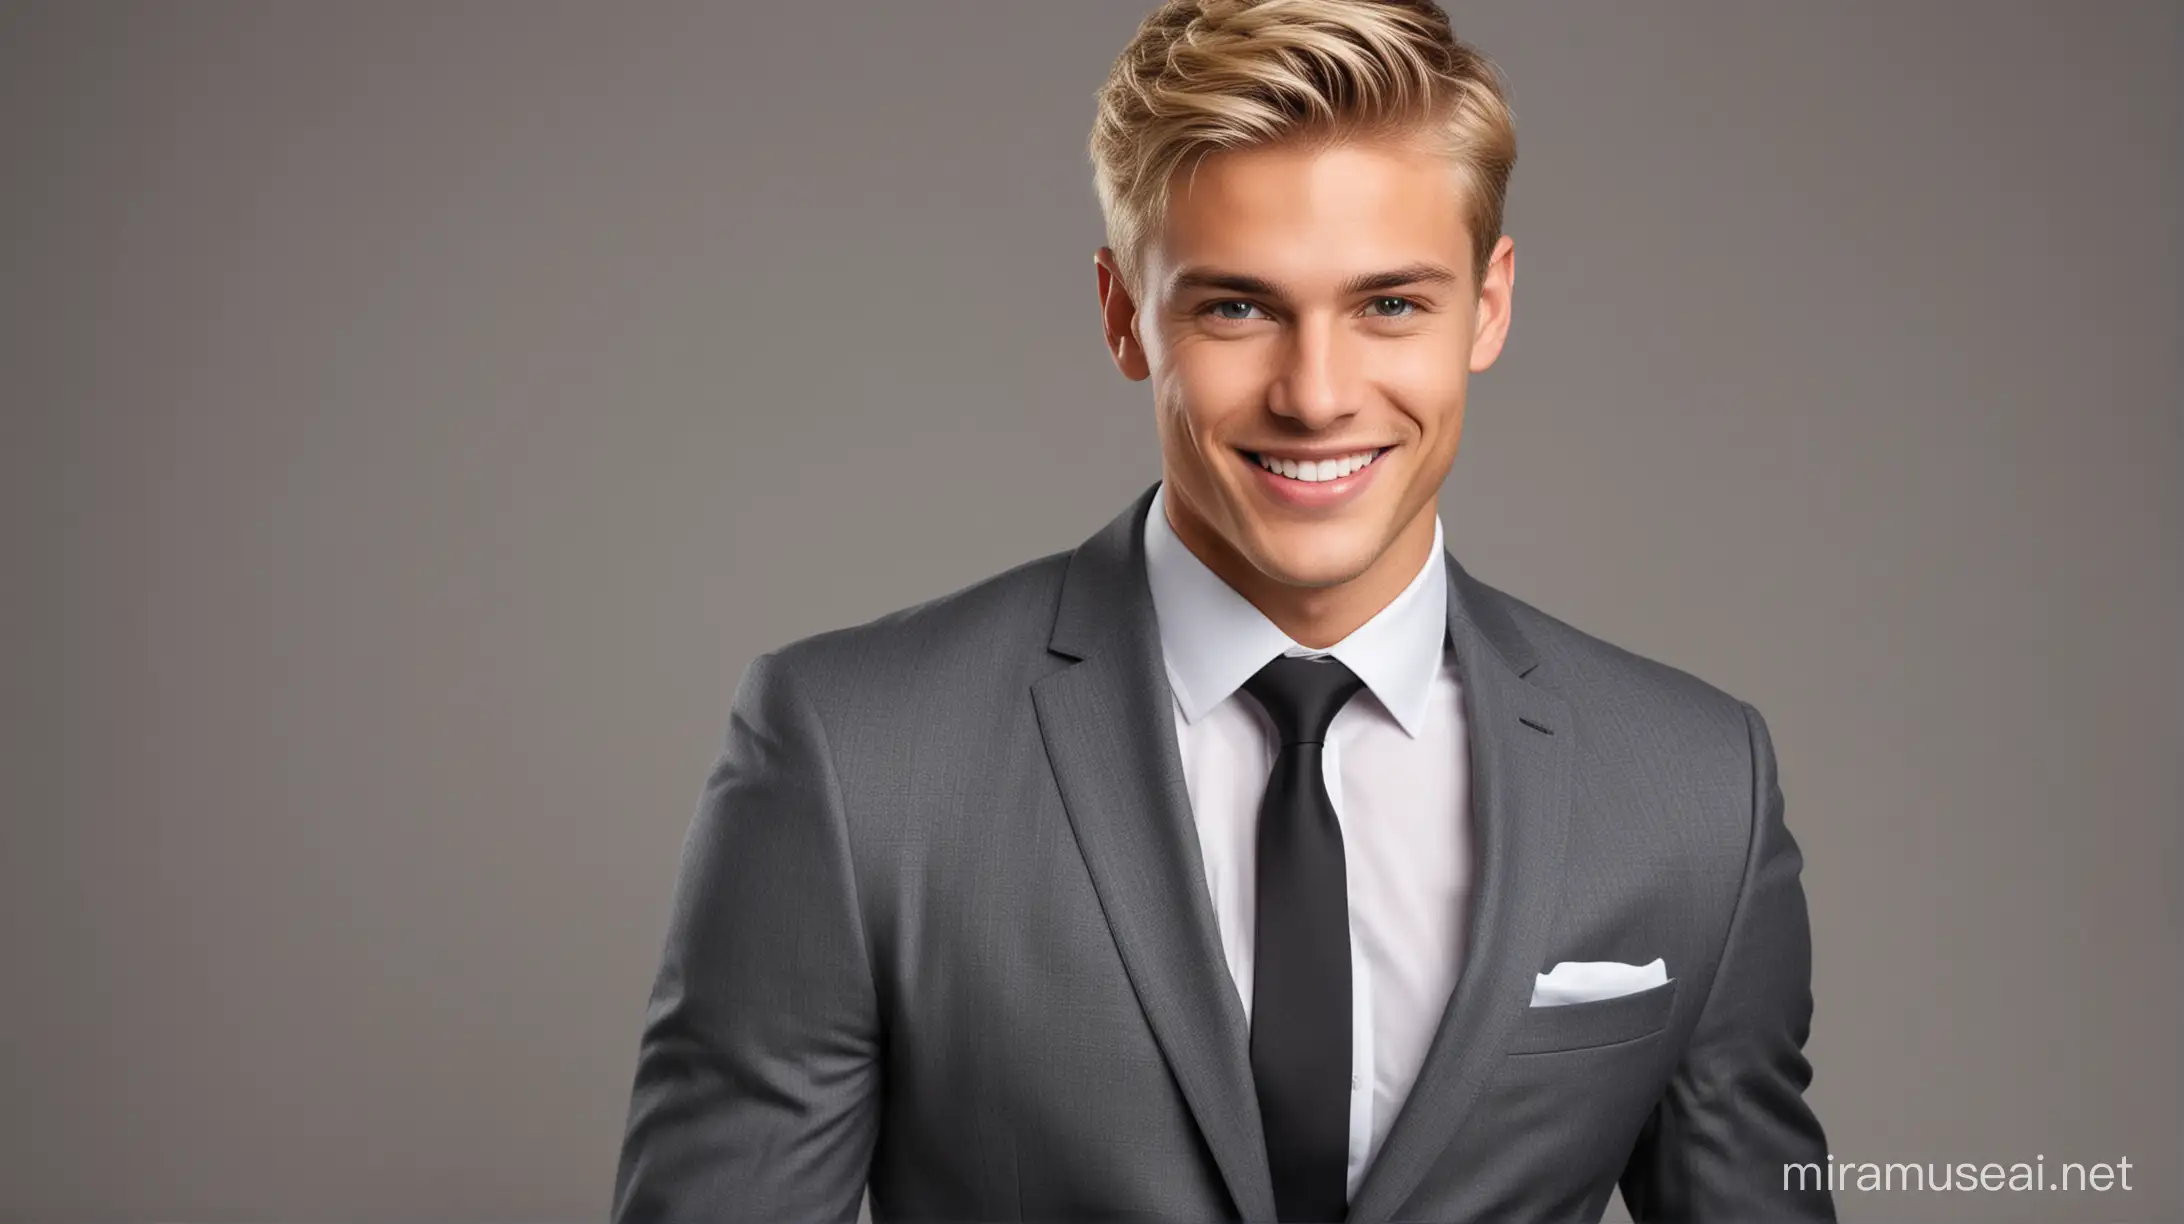 handsome and stylish smiling young man, short blonde hair, wearing a modern slim-fit charcoal suit, with a crisp white dress shirt and a contrasting tie